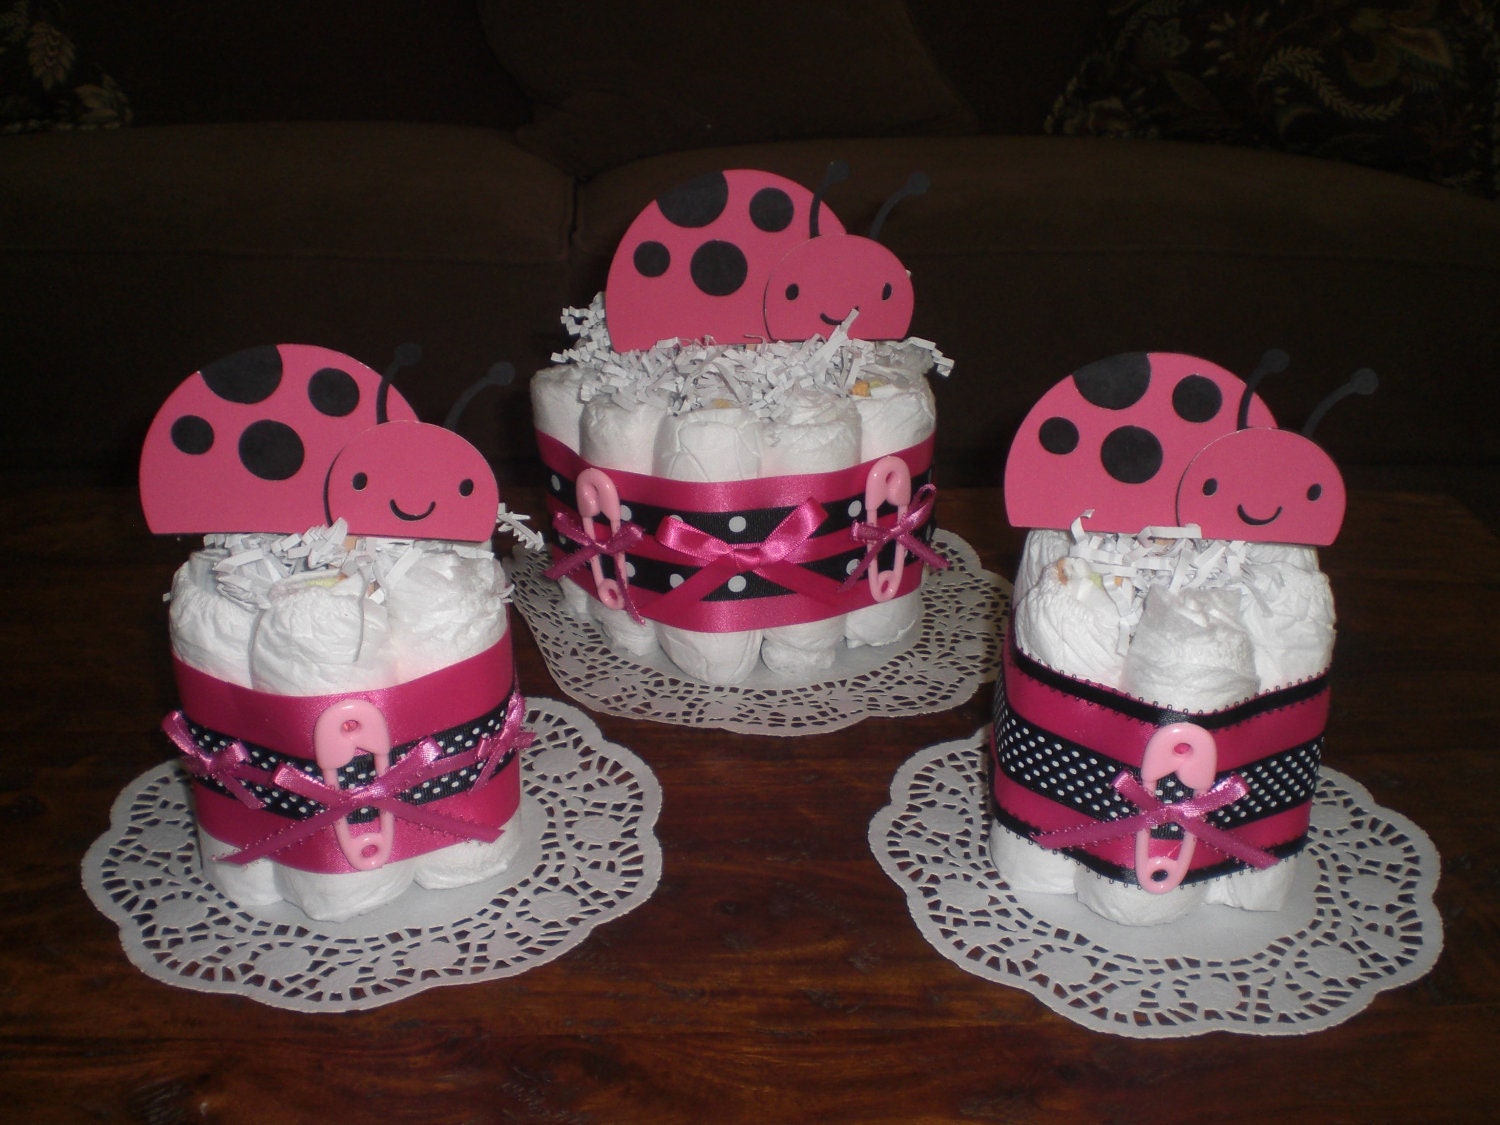 Popular items for ladybug centerpieces on Etsy